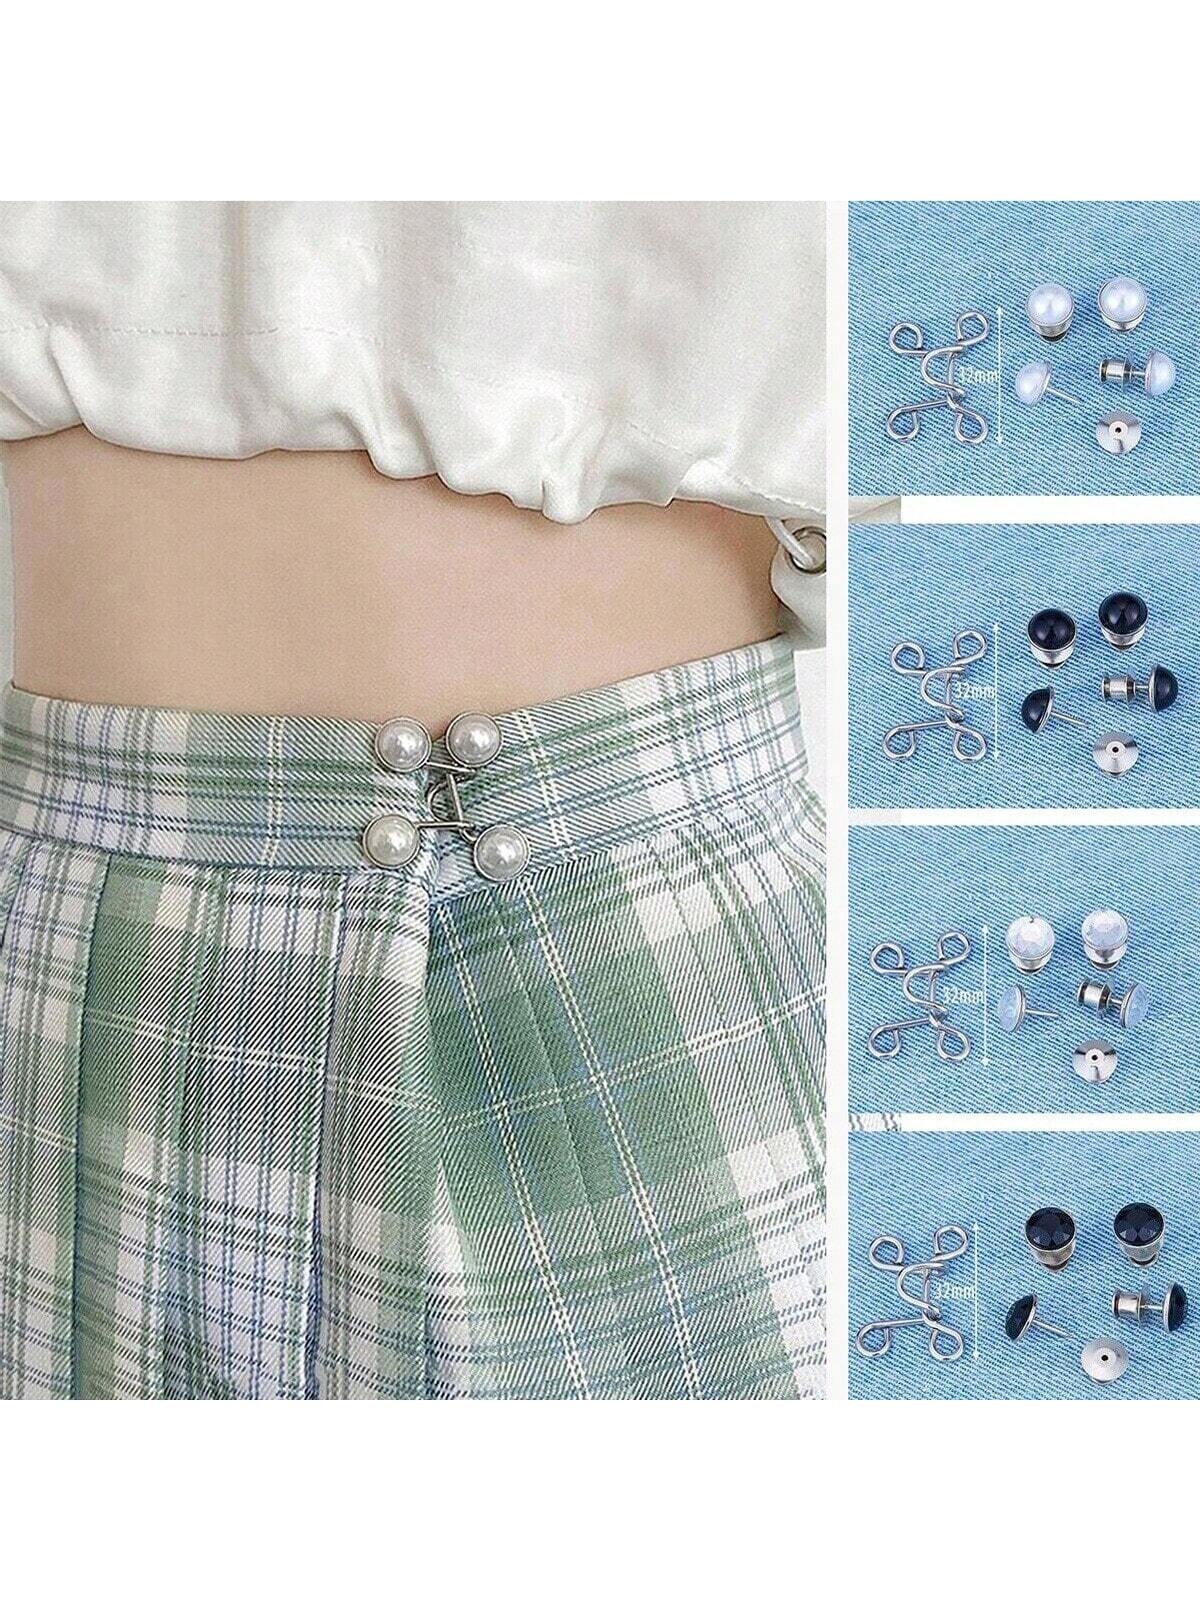 4pcs/set No-sew Detachable Adjustable Metal Buttons For Fixing Jeans' Waistband (4 Colors/pack)